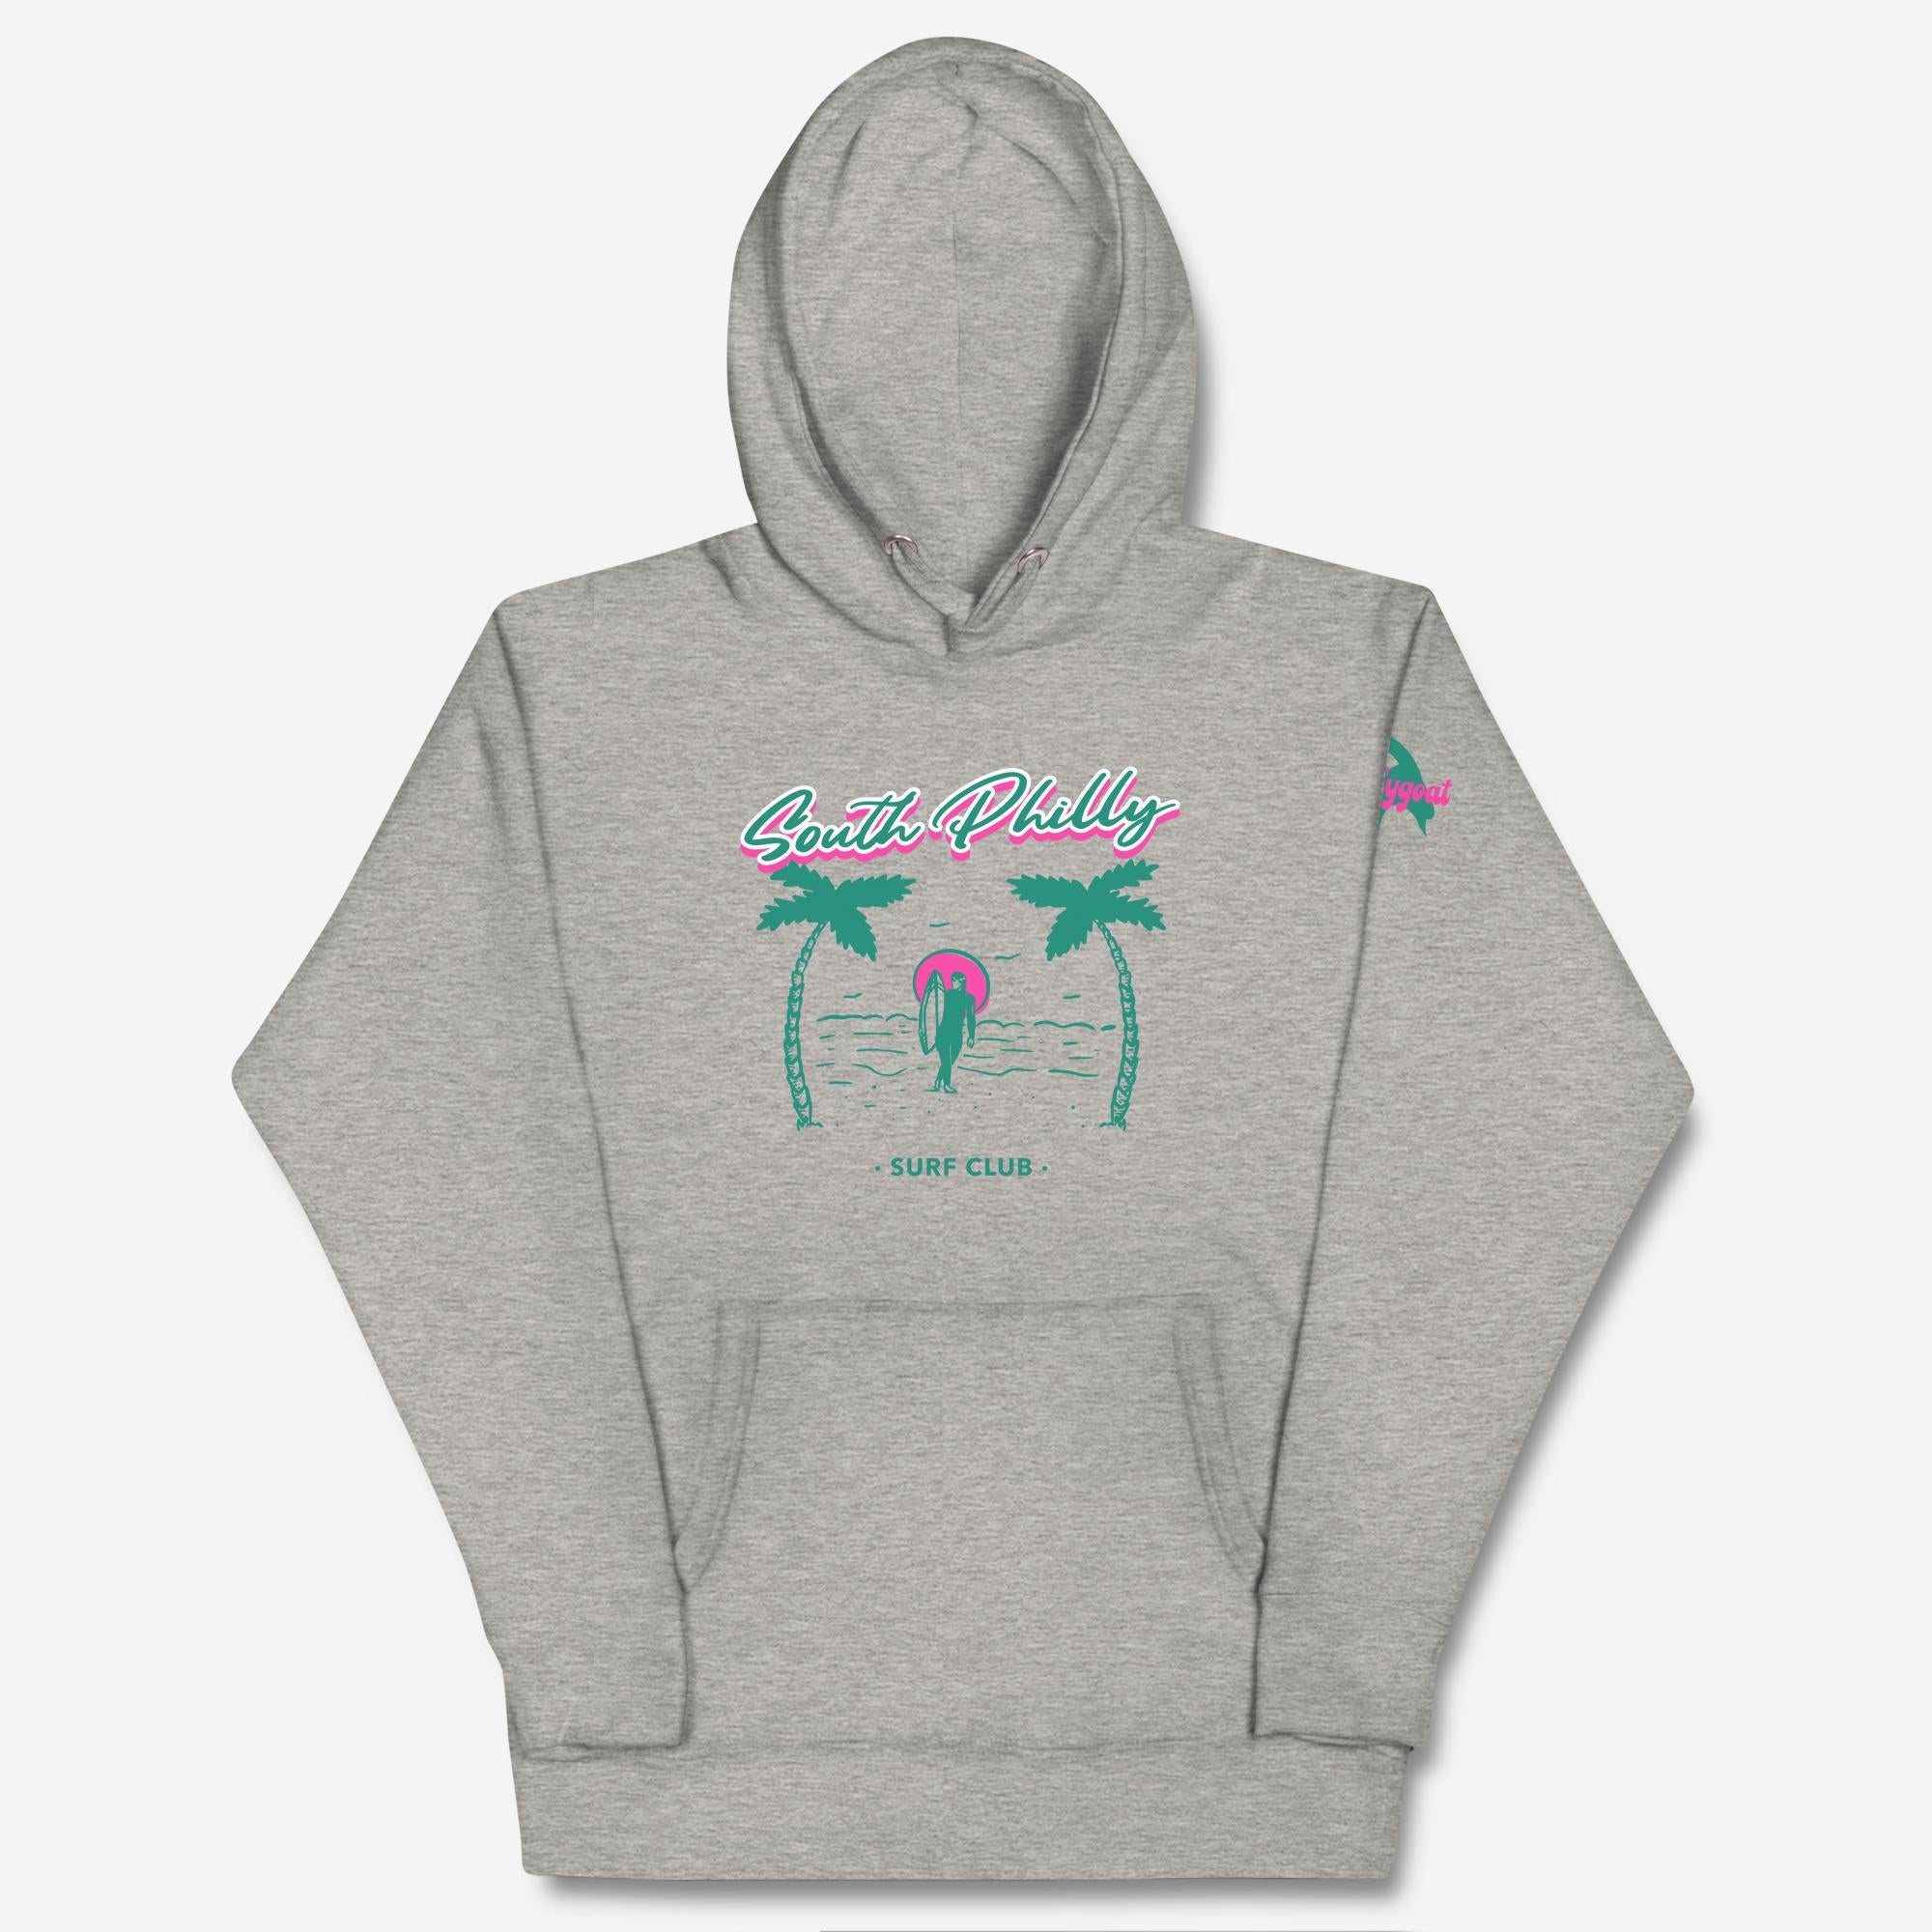 "South Philly Surf Club" Hoodie